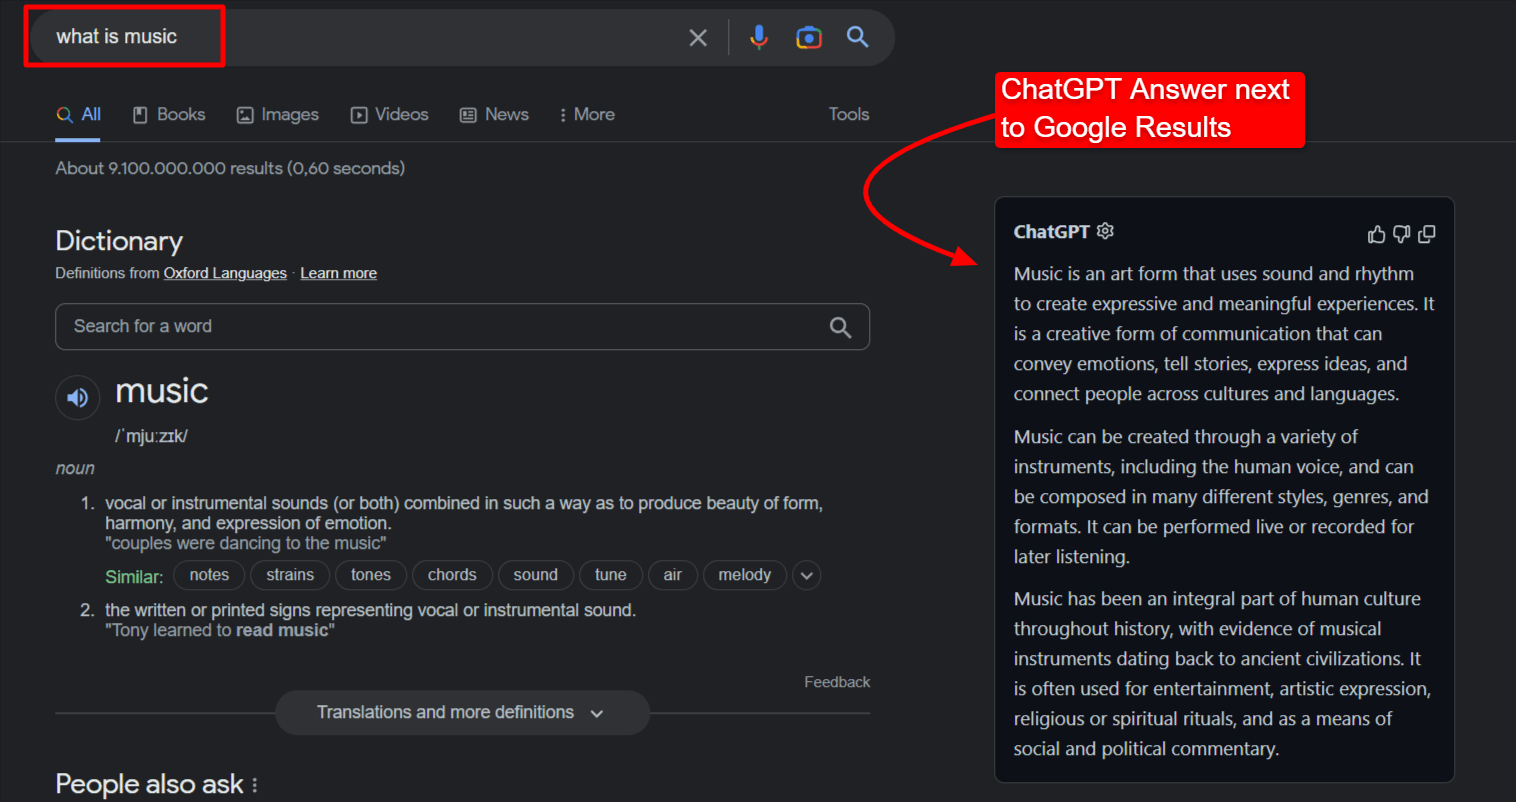 ChatGPT answers next to Google Results